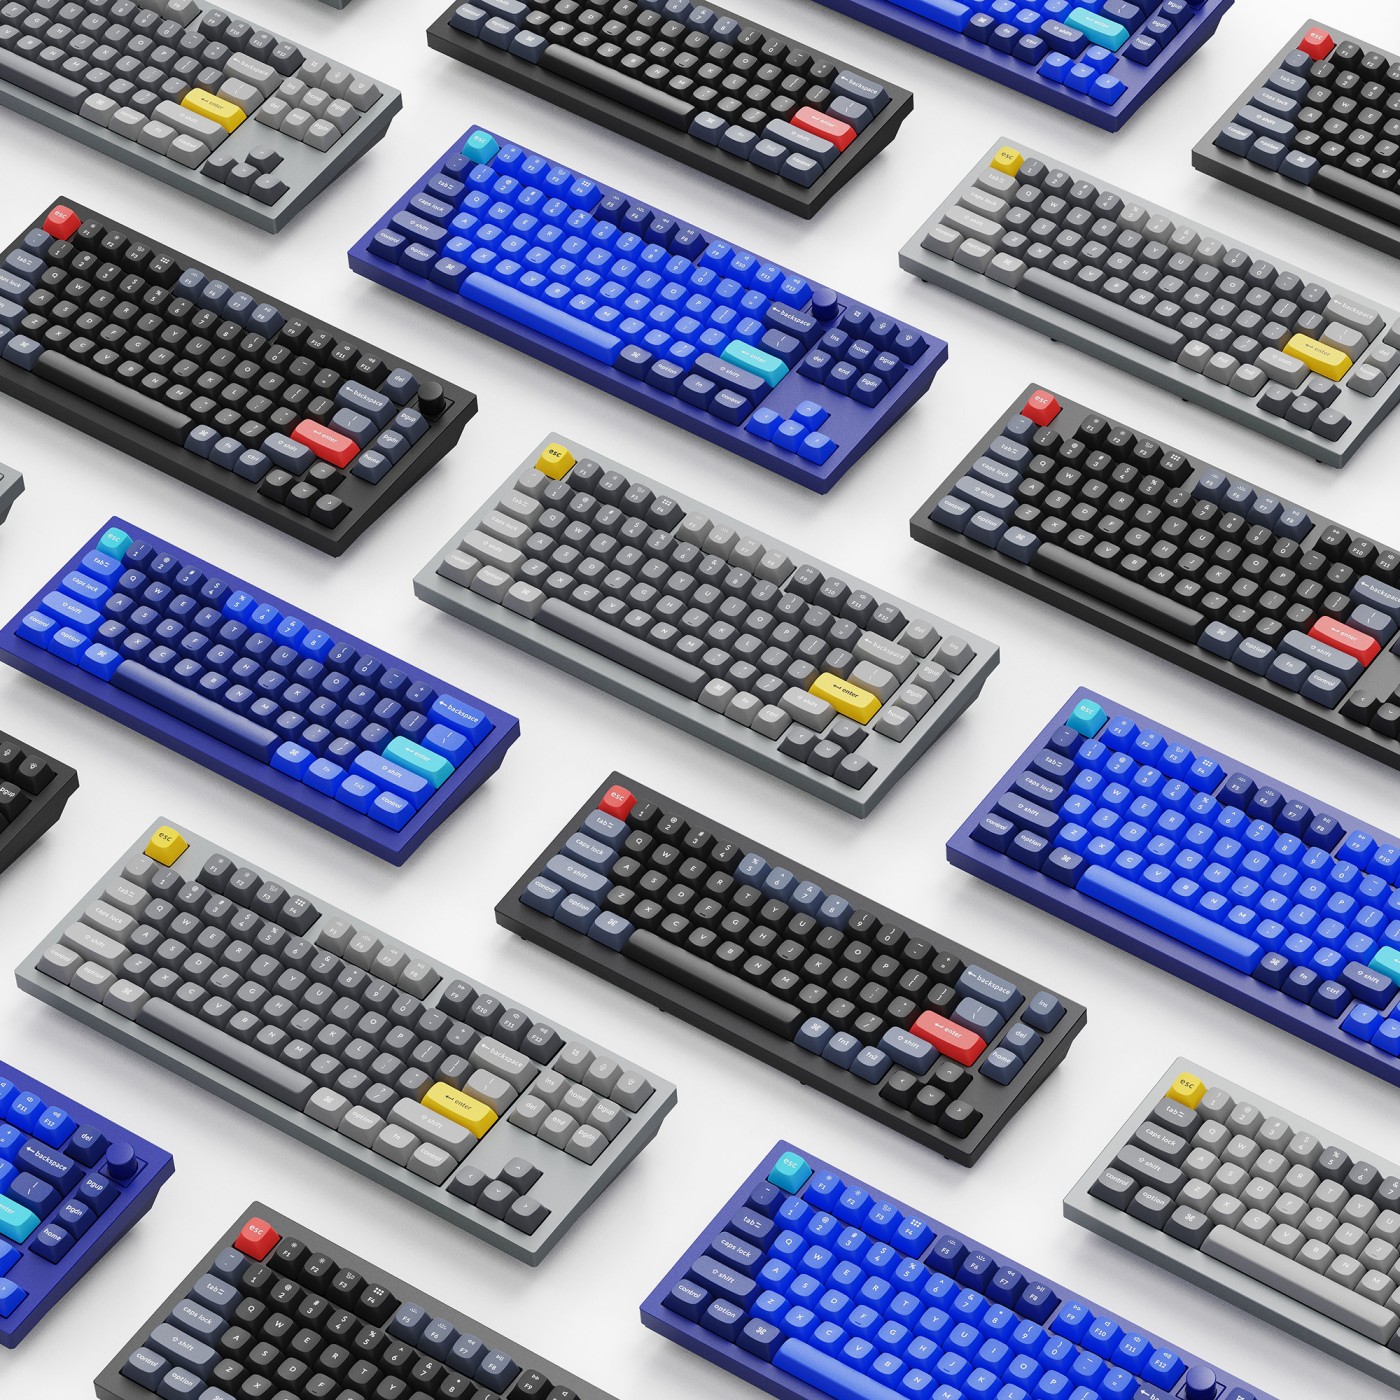 Keychron On Twitter A Trend Hitting The Mechanical Keyboard Market Is